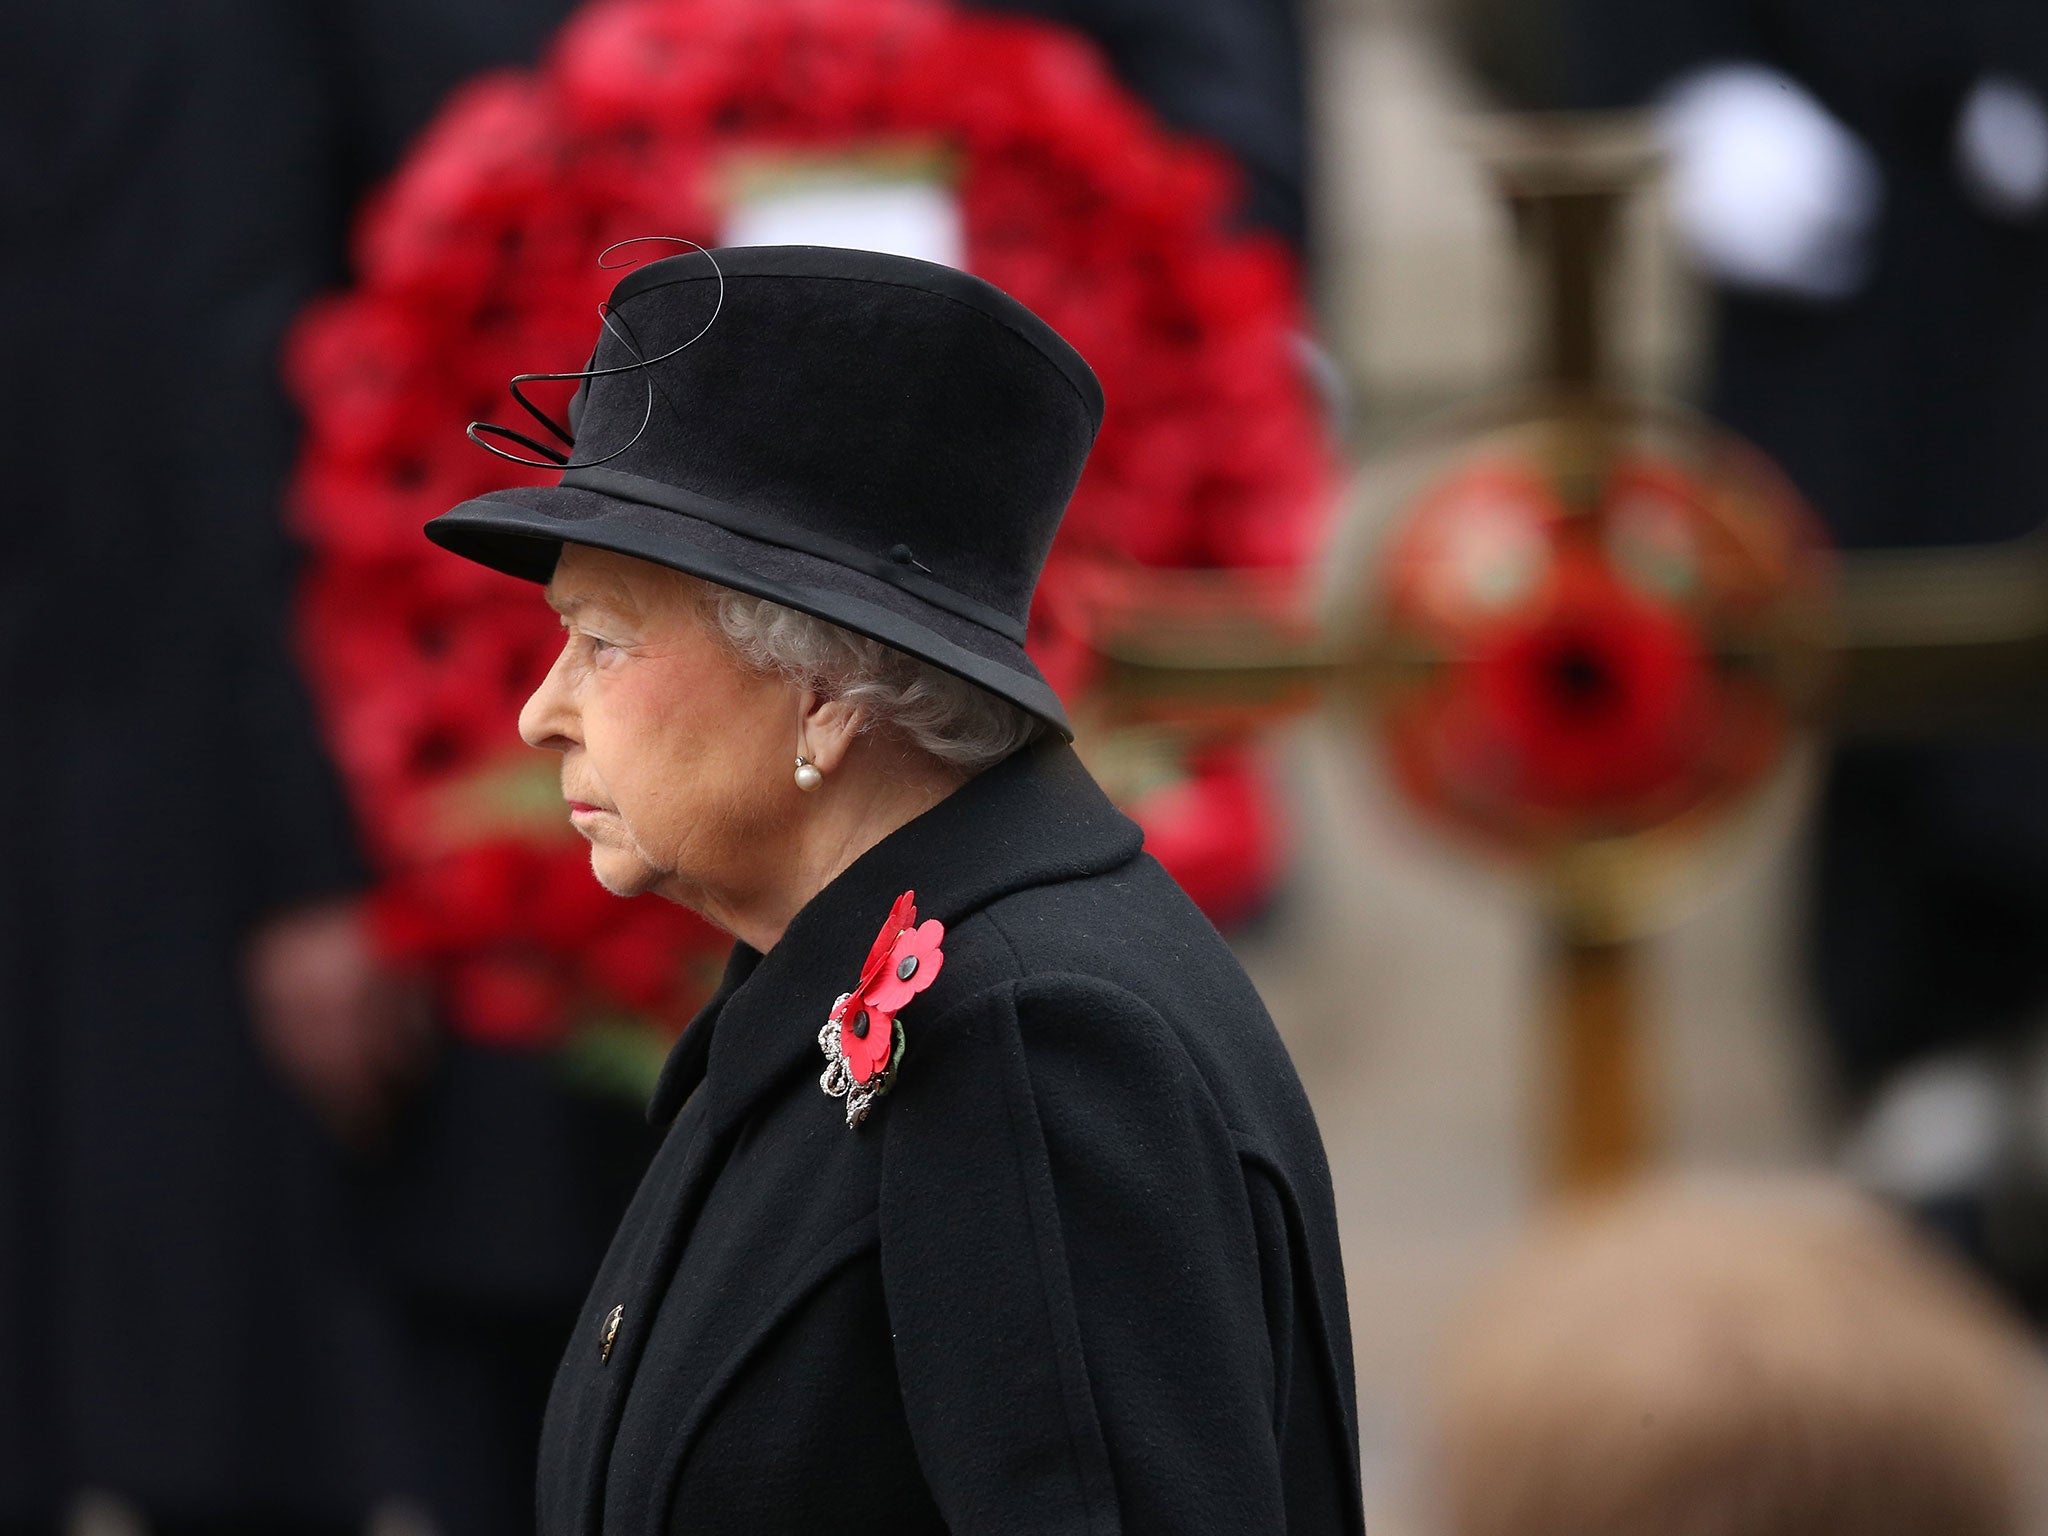 The Queen attends the annual Remembrance Sunday Service at the Cenotaph on Whitehall on 9 November, 2014